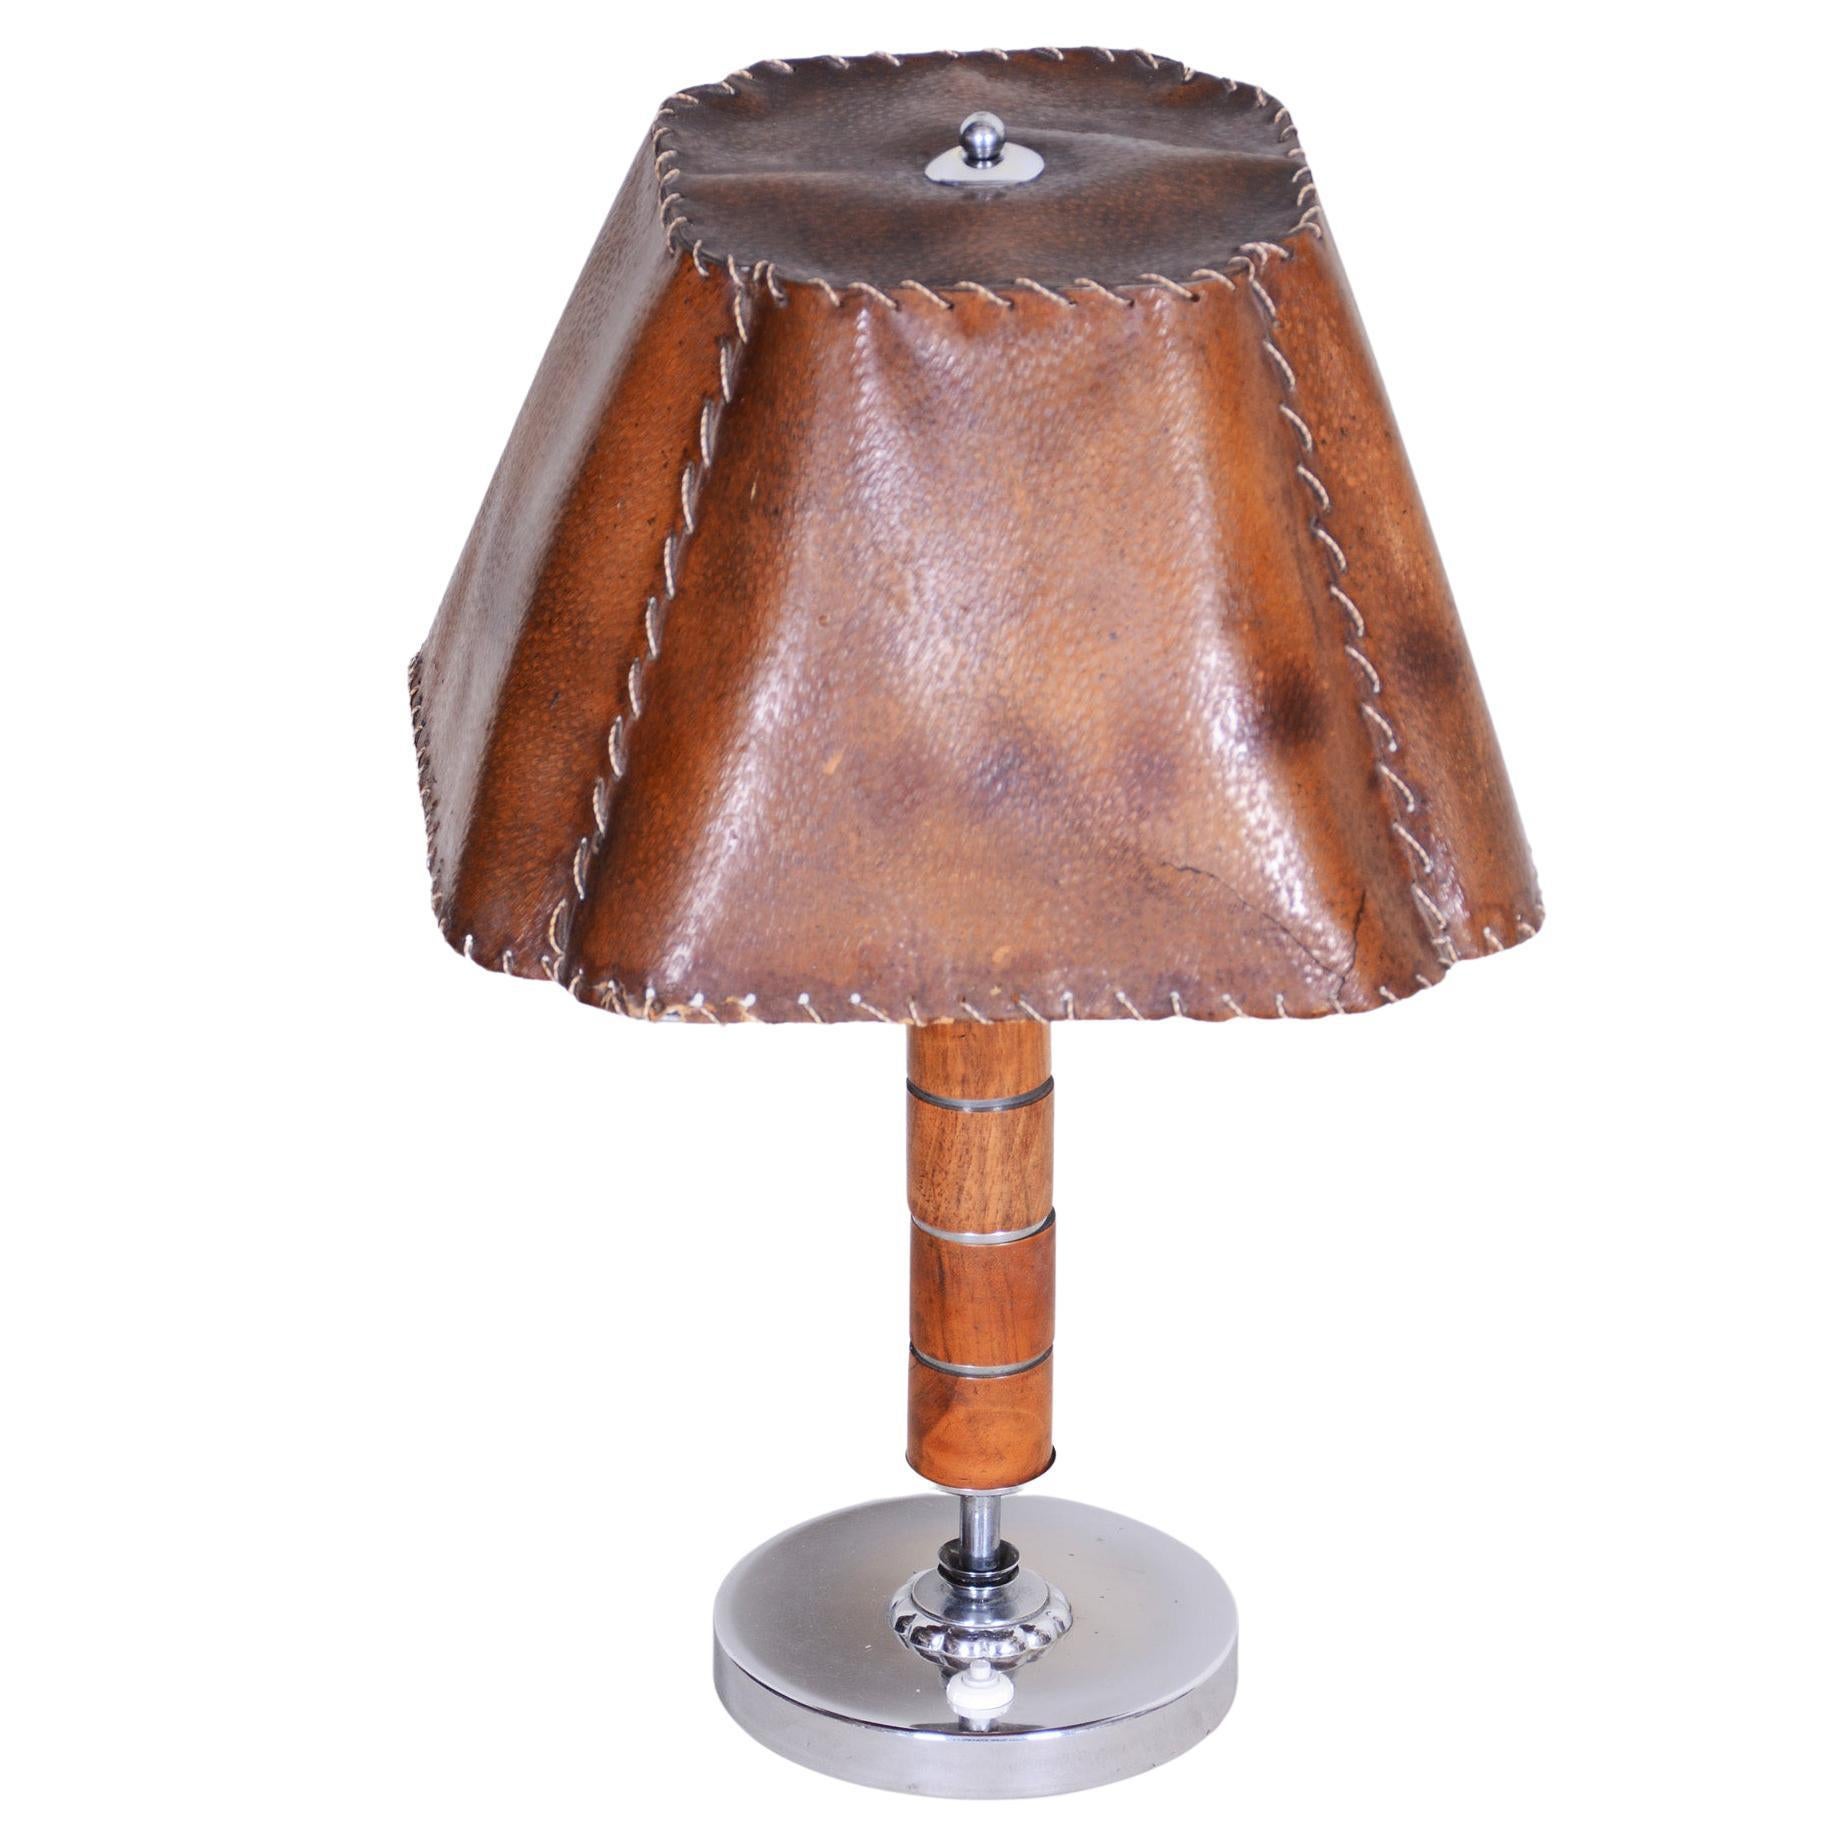 Czech Art Deco Table Lamp, Fully Restored, 1920s, Walnut, Chrome and Parchment